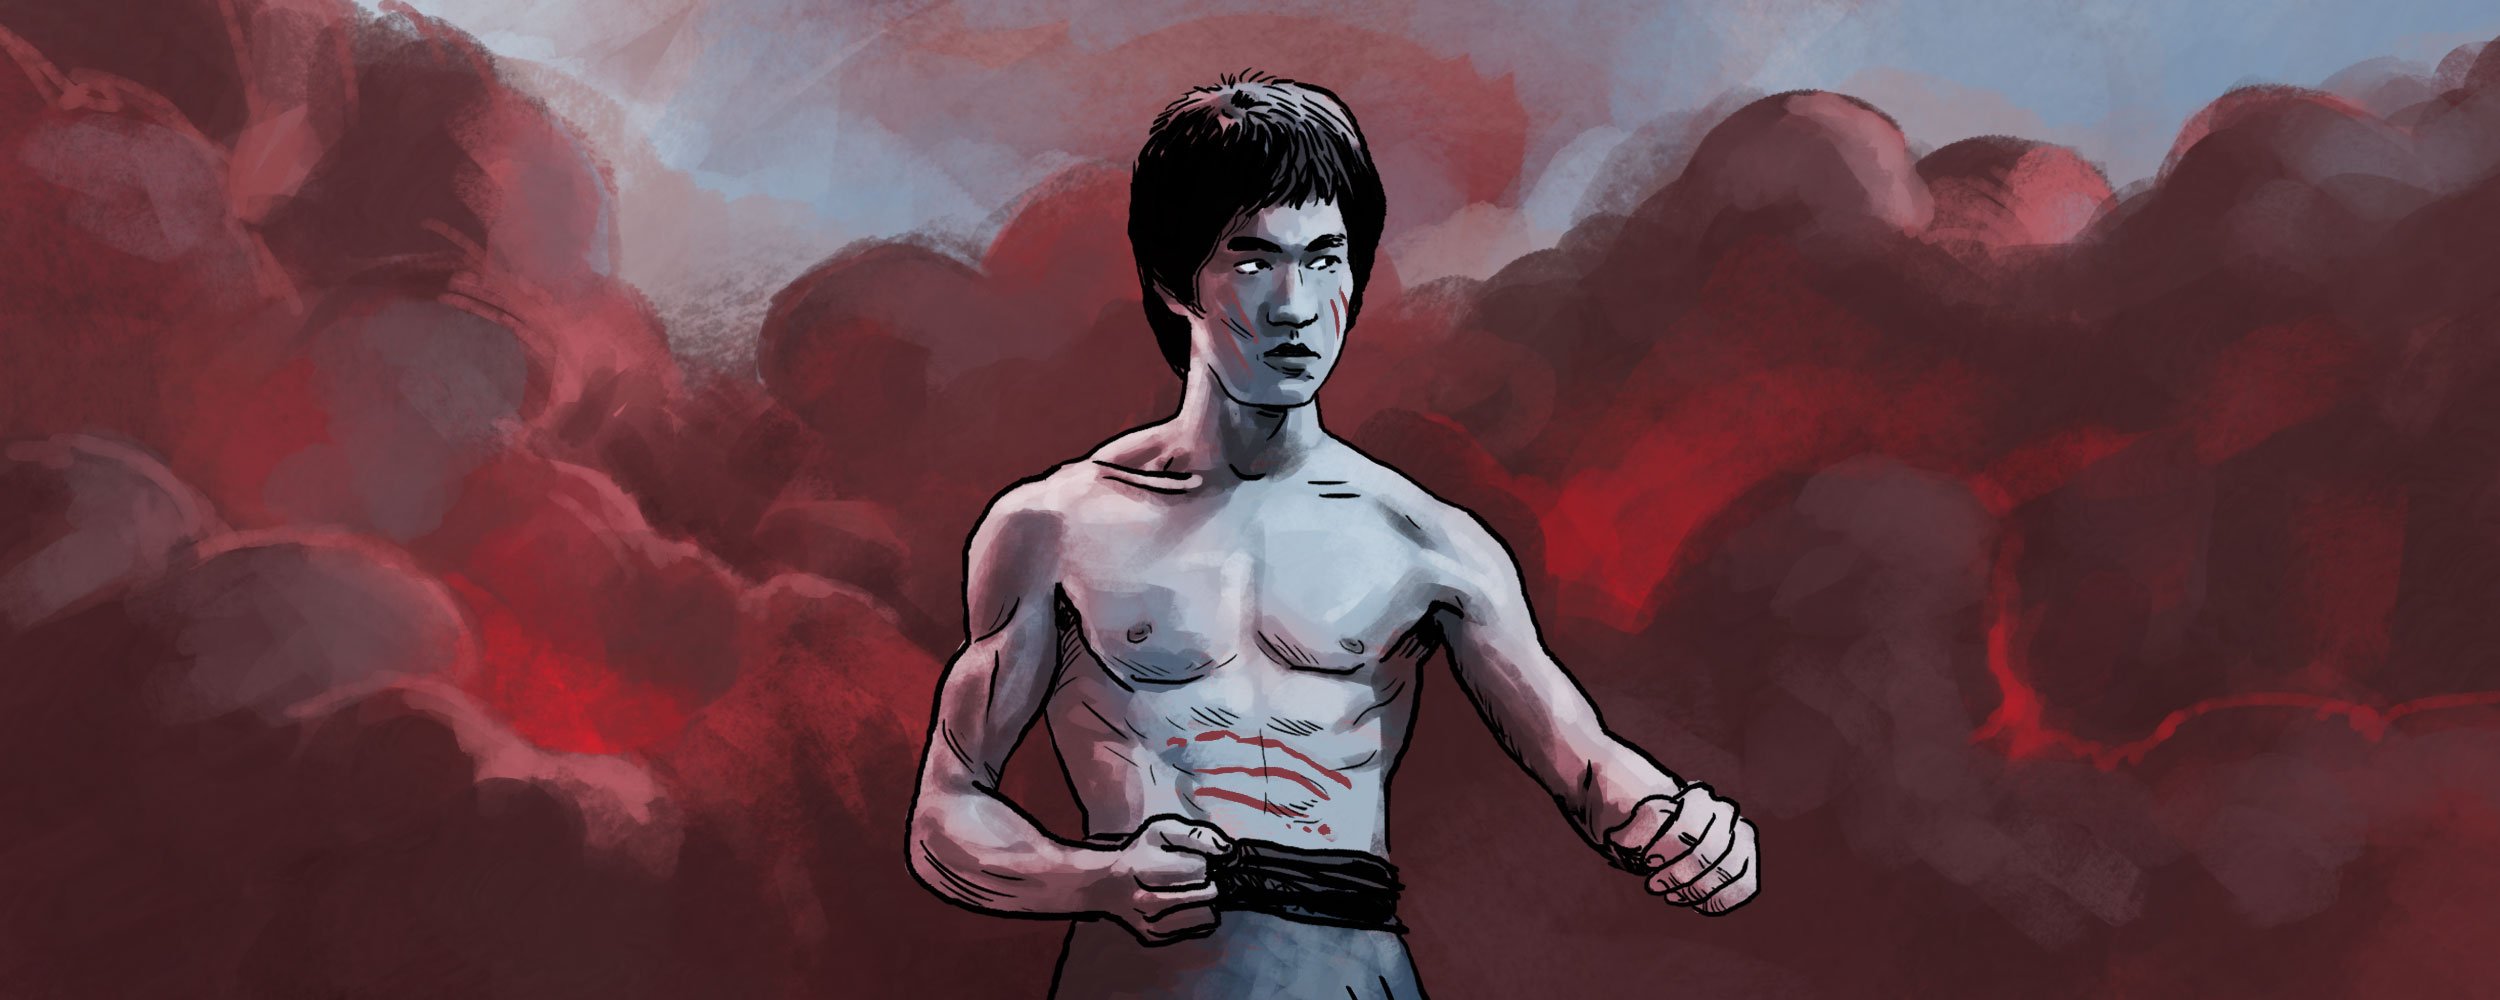 Bruce Lee's fitness regime and diet made him a pioneer among athletes and  martial artists alike